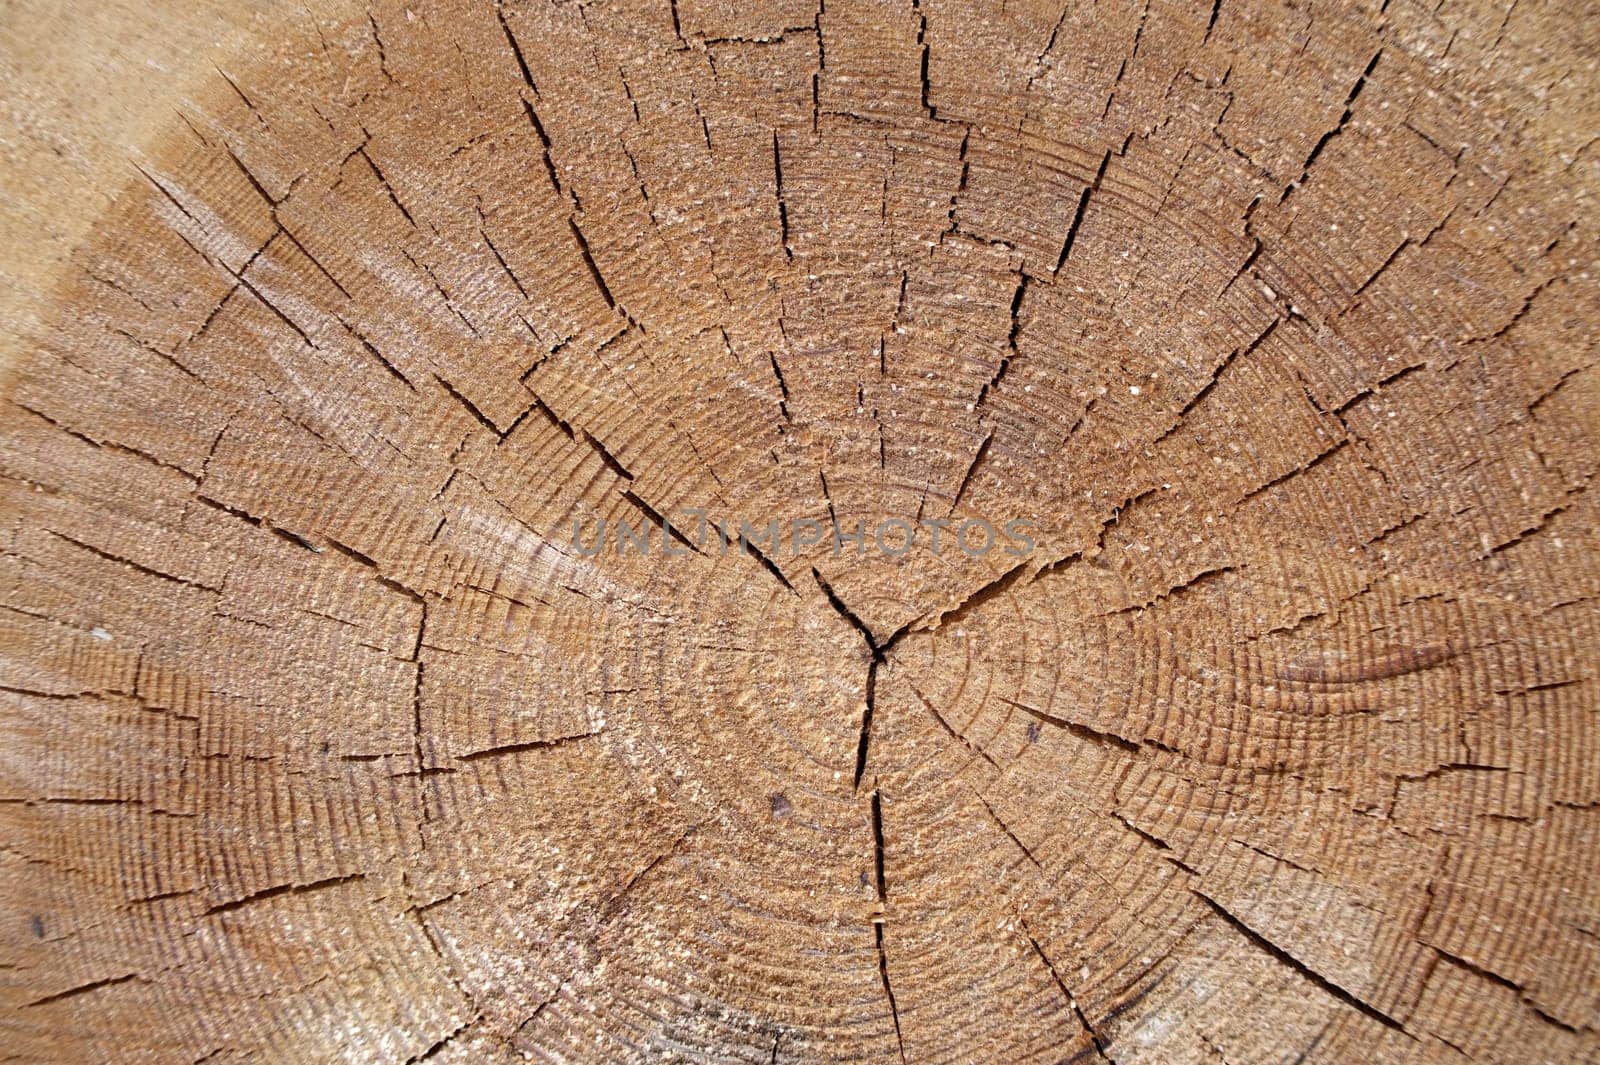 Close up view of the cross section of a tree trunk by NetPix